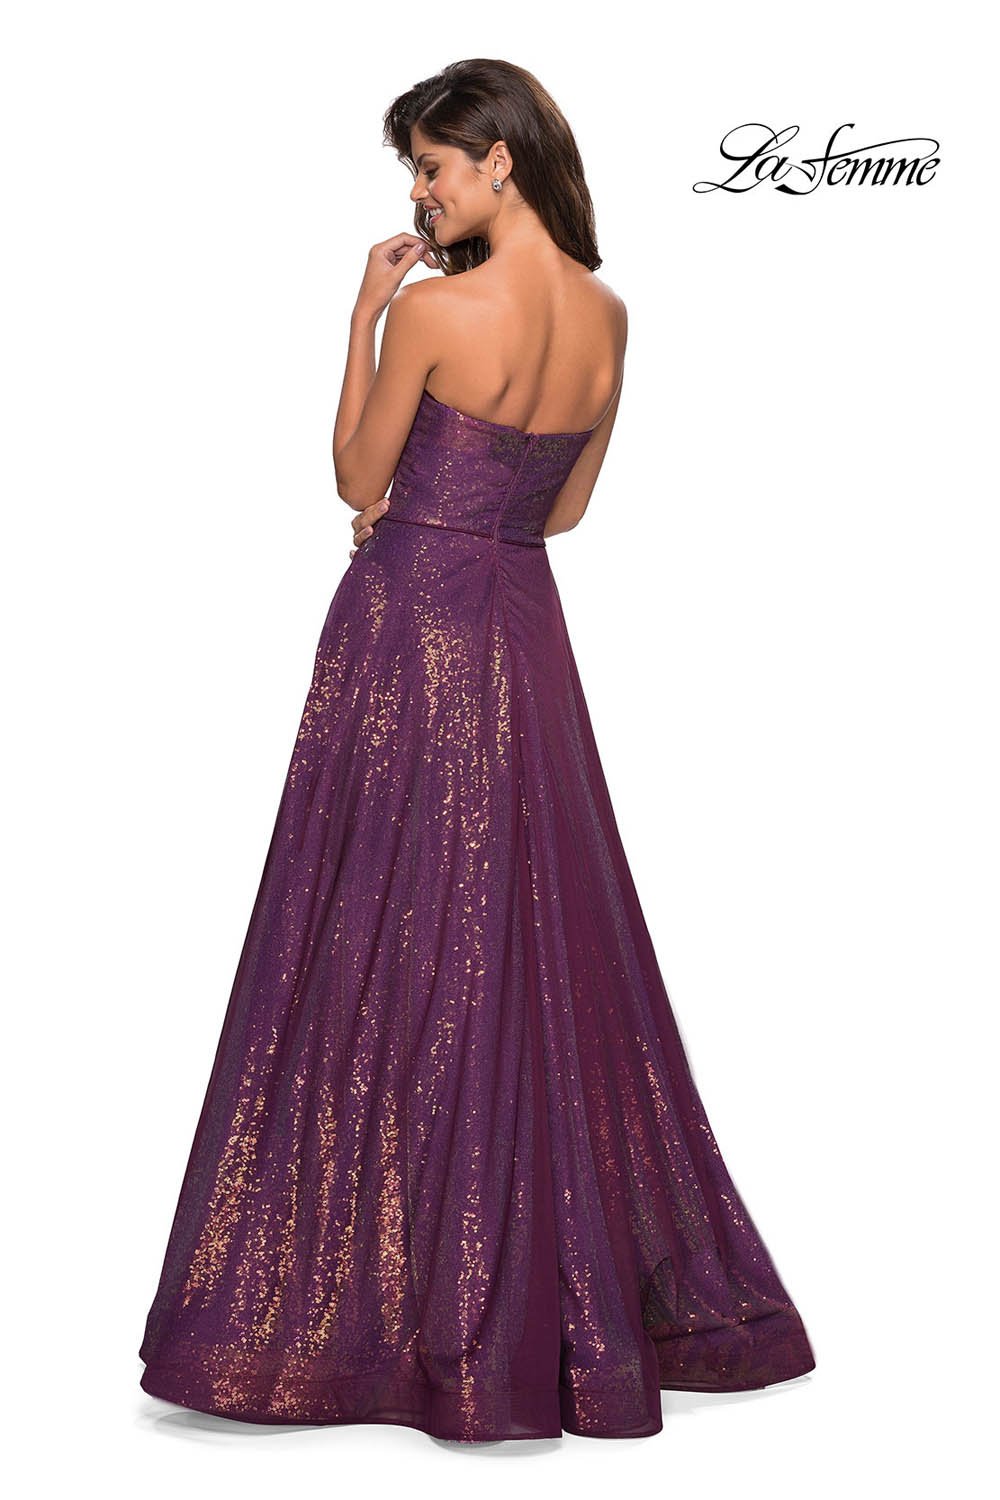 La Femme 27296 dress images in these colors: Dark Berry.